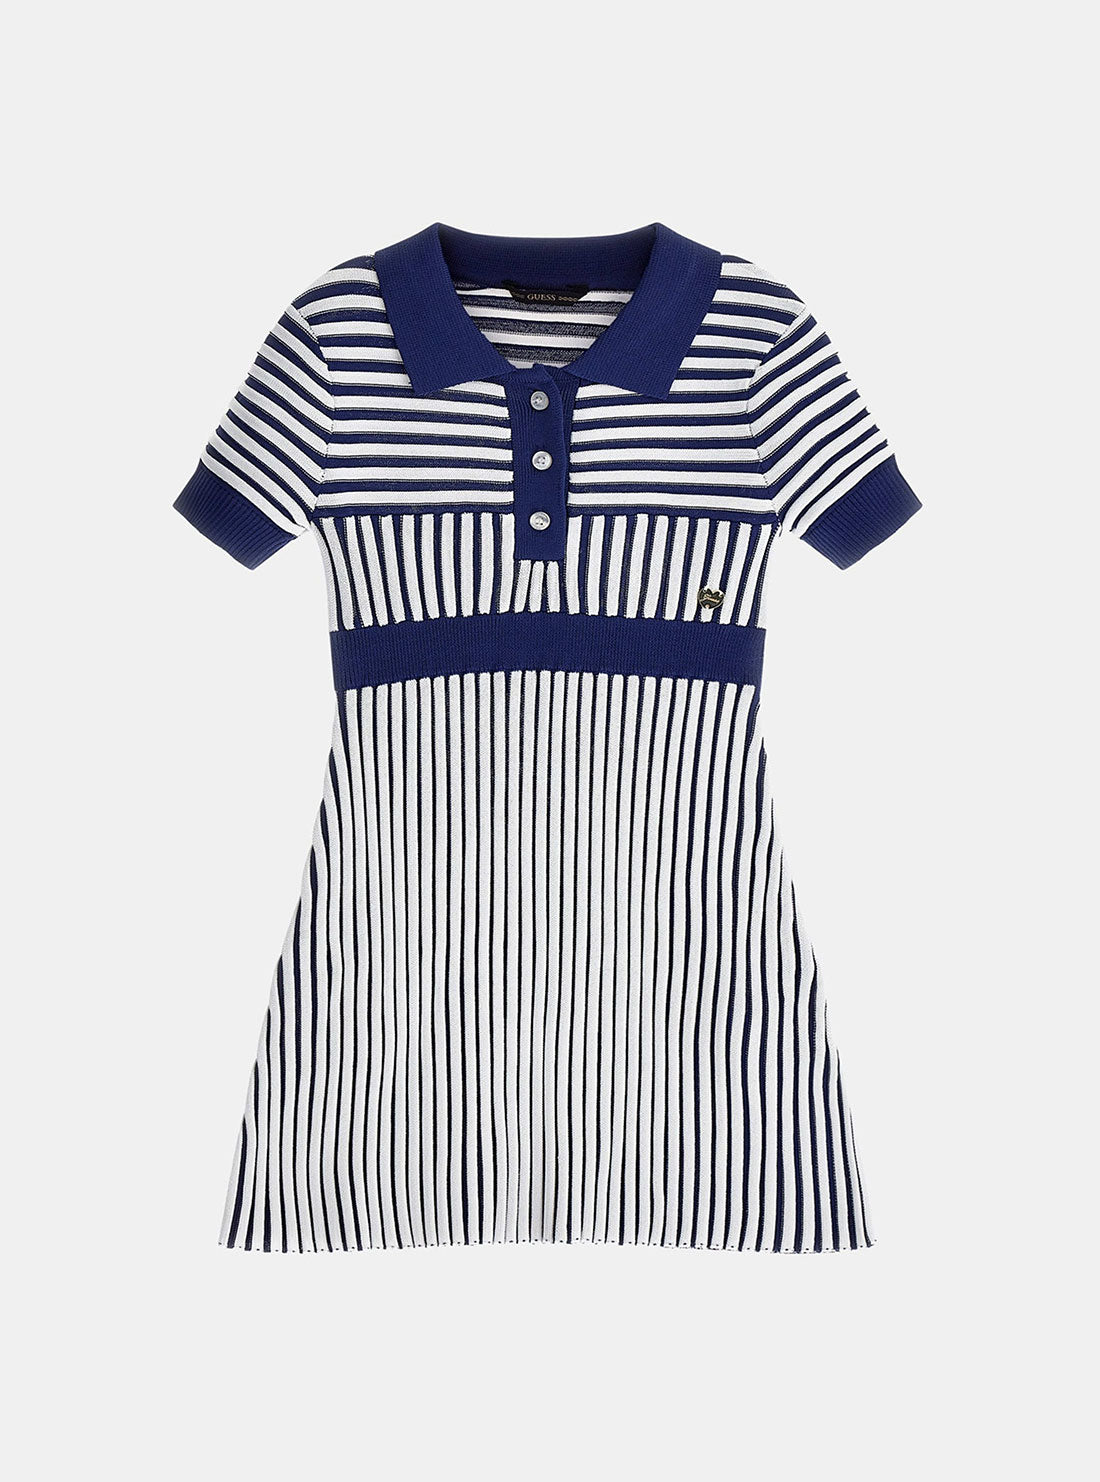 GUESS Navy Stripe Short Sleeve Sweater Dress (2-7) front view